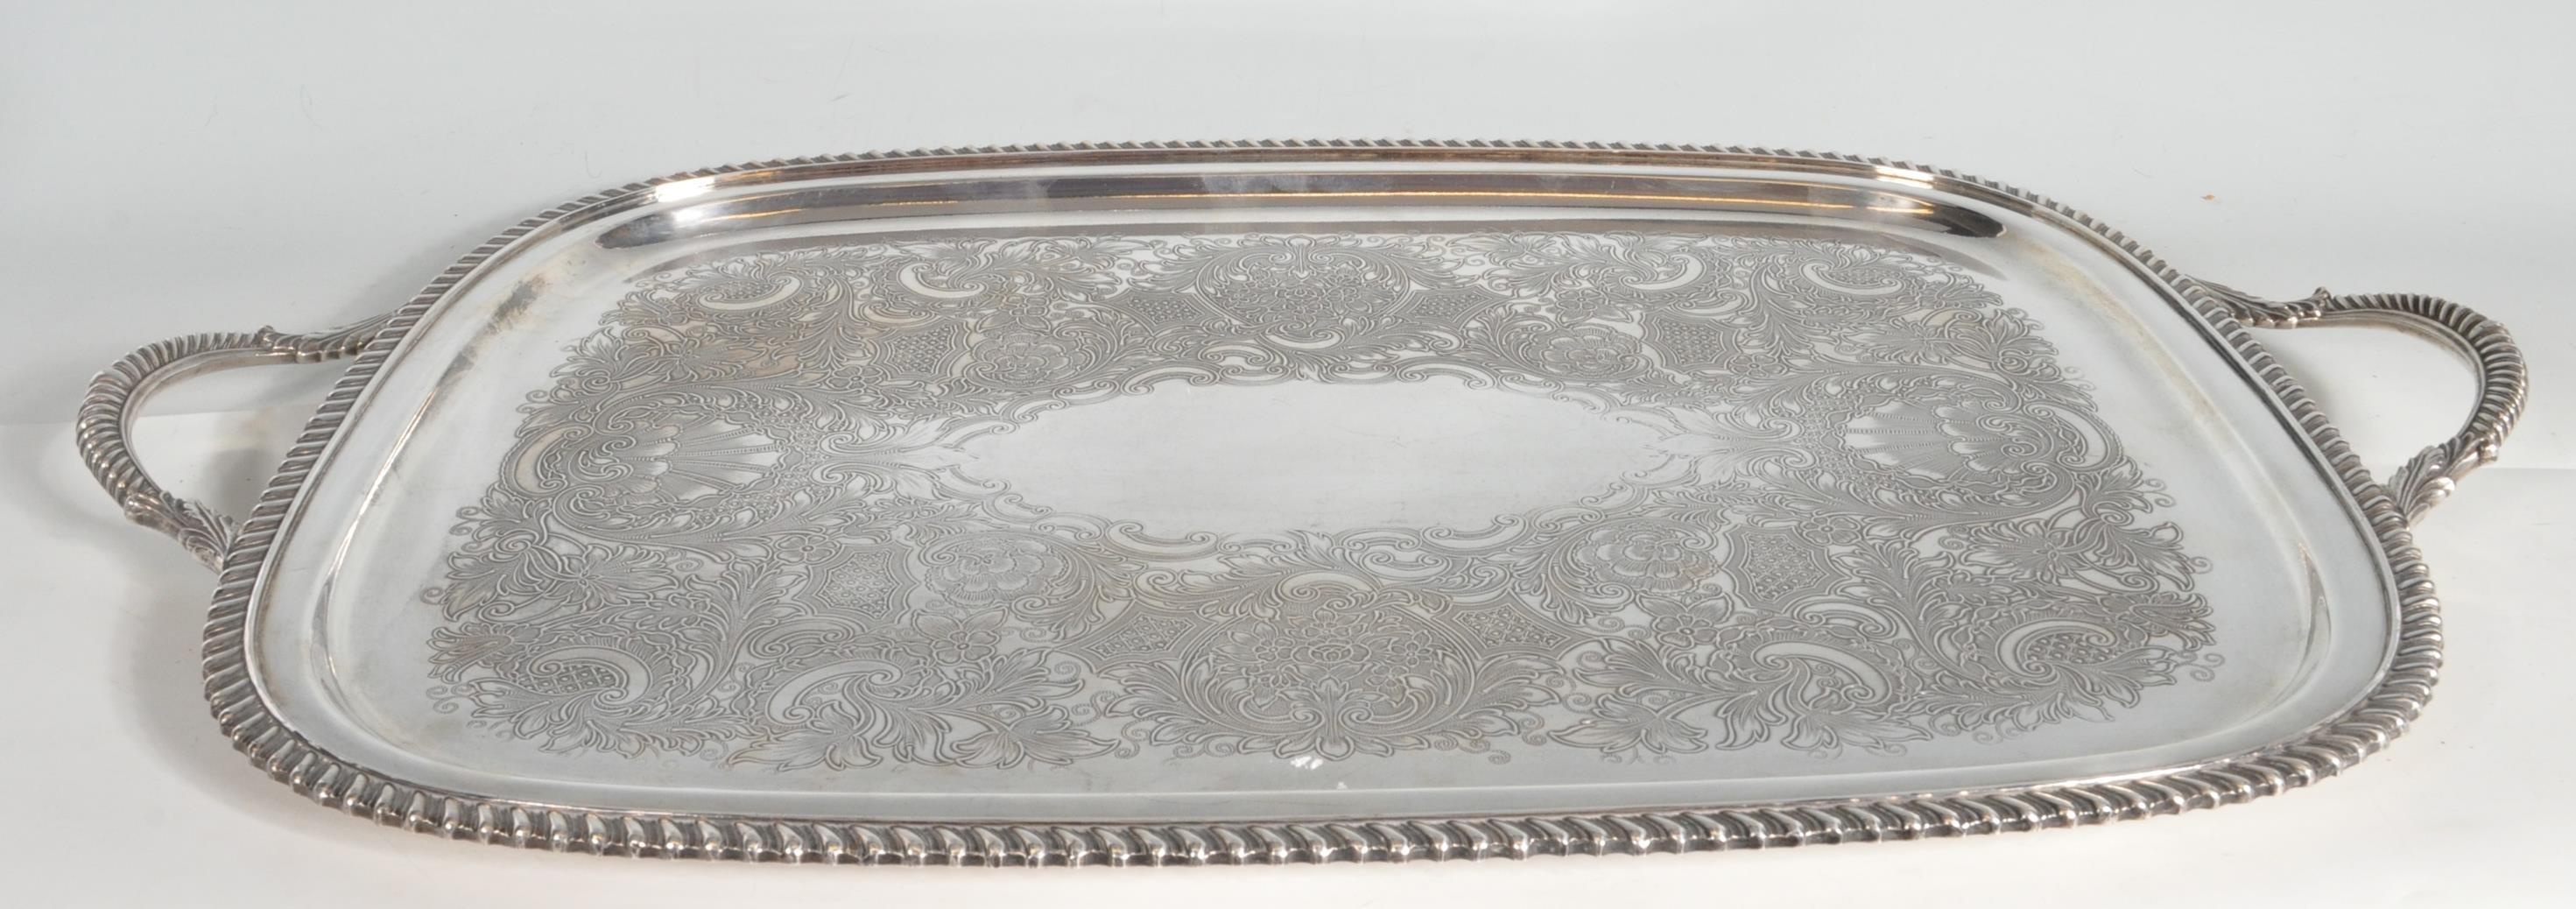 LARGE VINTAGE SILVER PLATE MERIDON SERVING TRAY. - Image 11 of 15